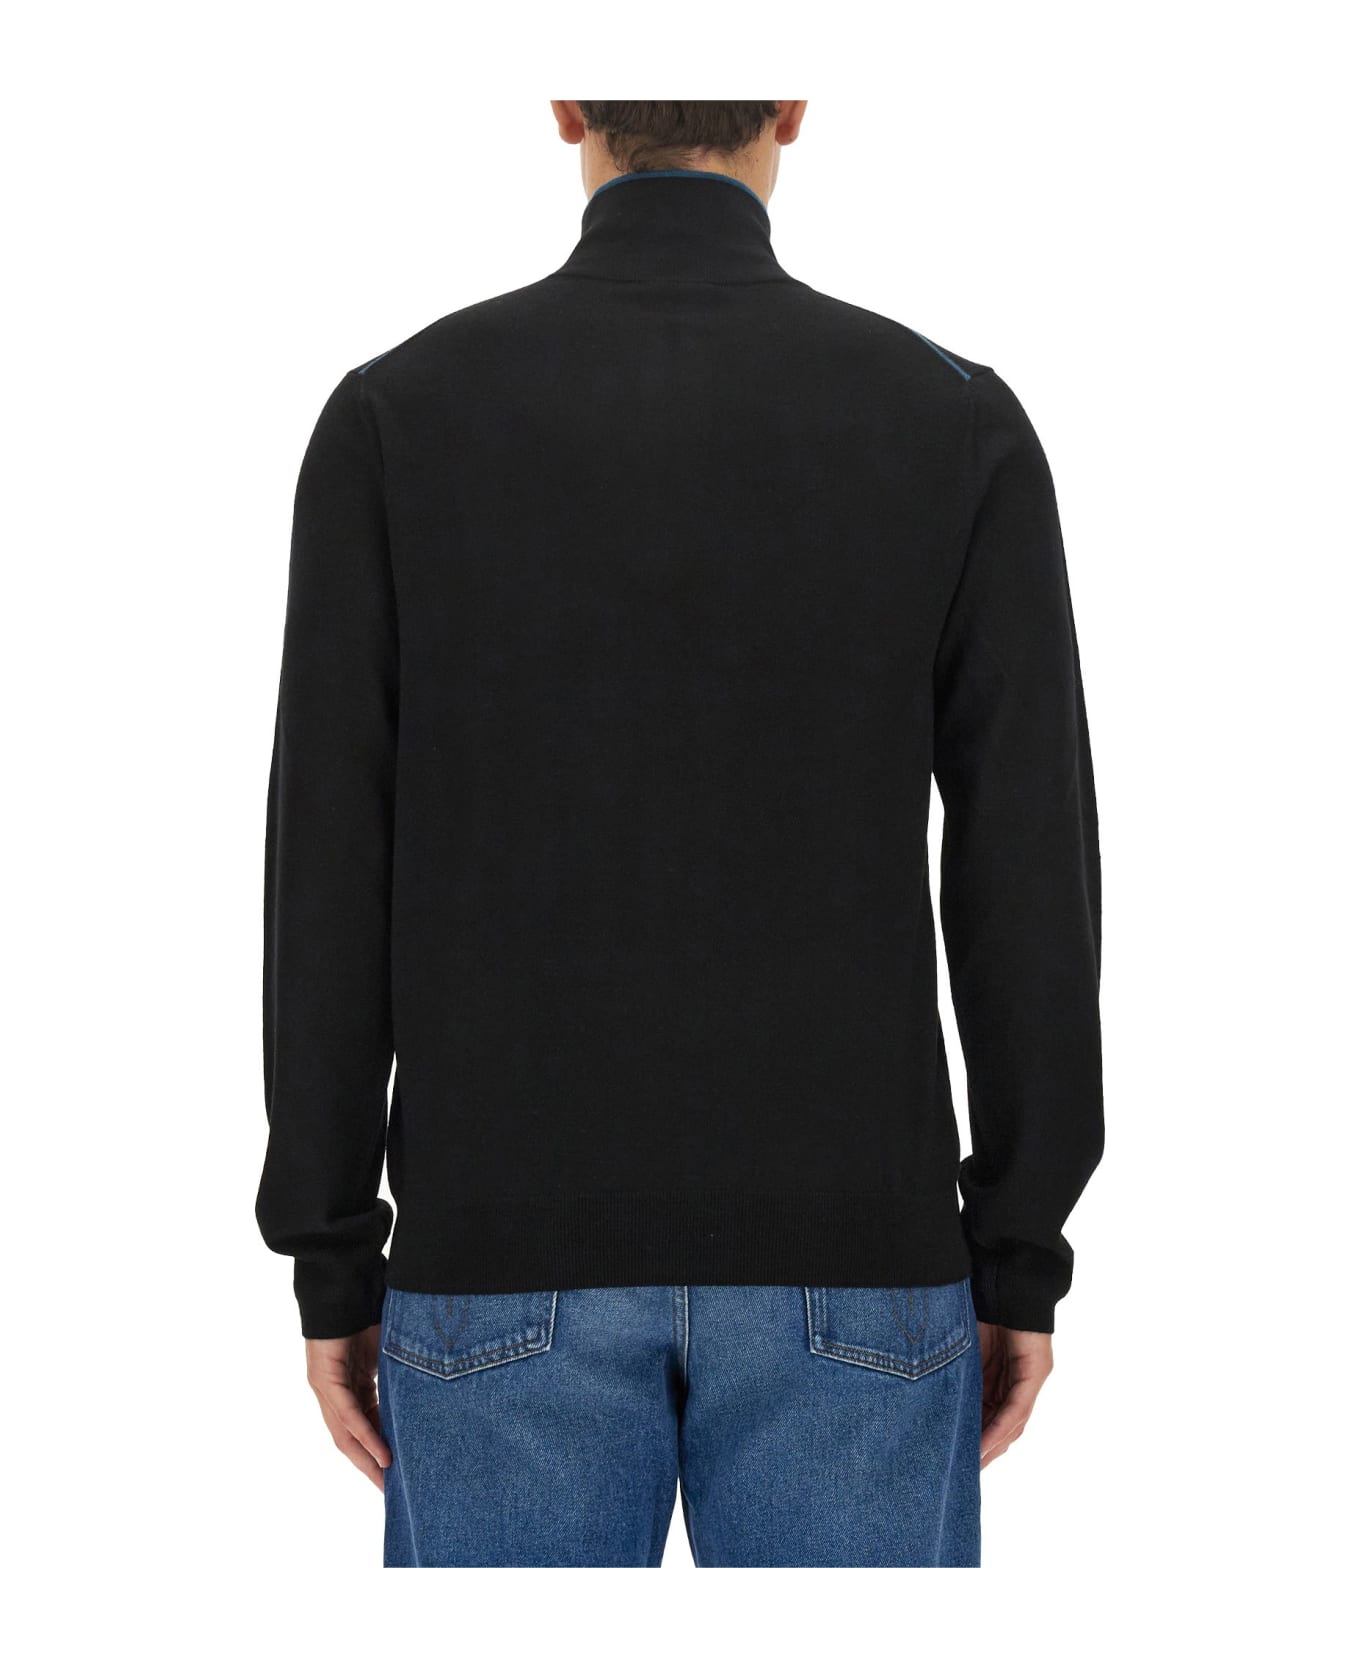 PS by Paul Smith Jersey With Logo Sweater - BLACK ニットウェア